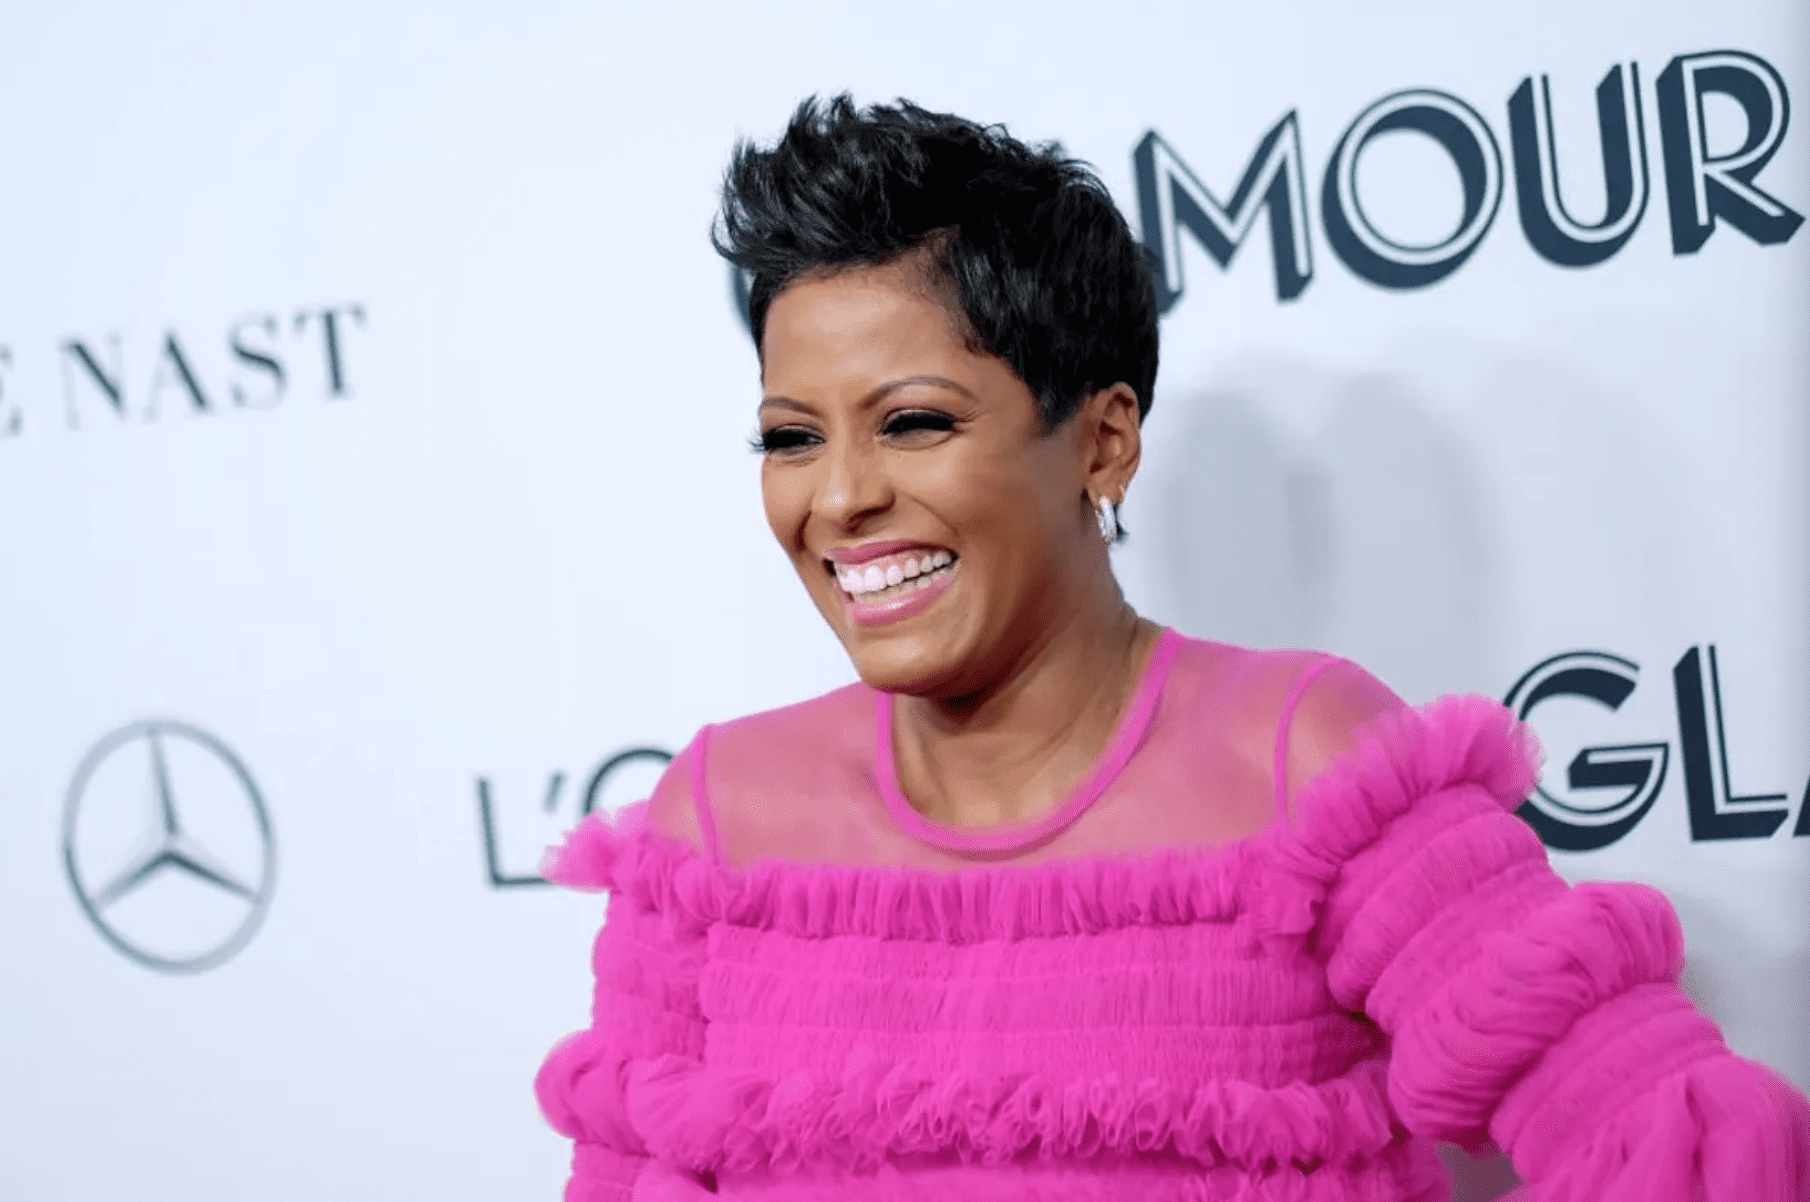 Tamron Hall attends the 2019 Glamour Women of the Year Awards at Alice Tully Hall on November 11, 2019. | Source: Getty Images